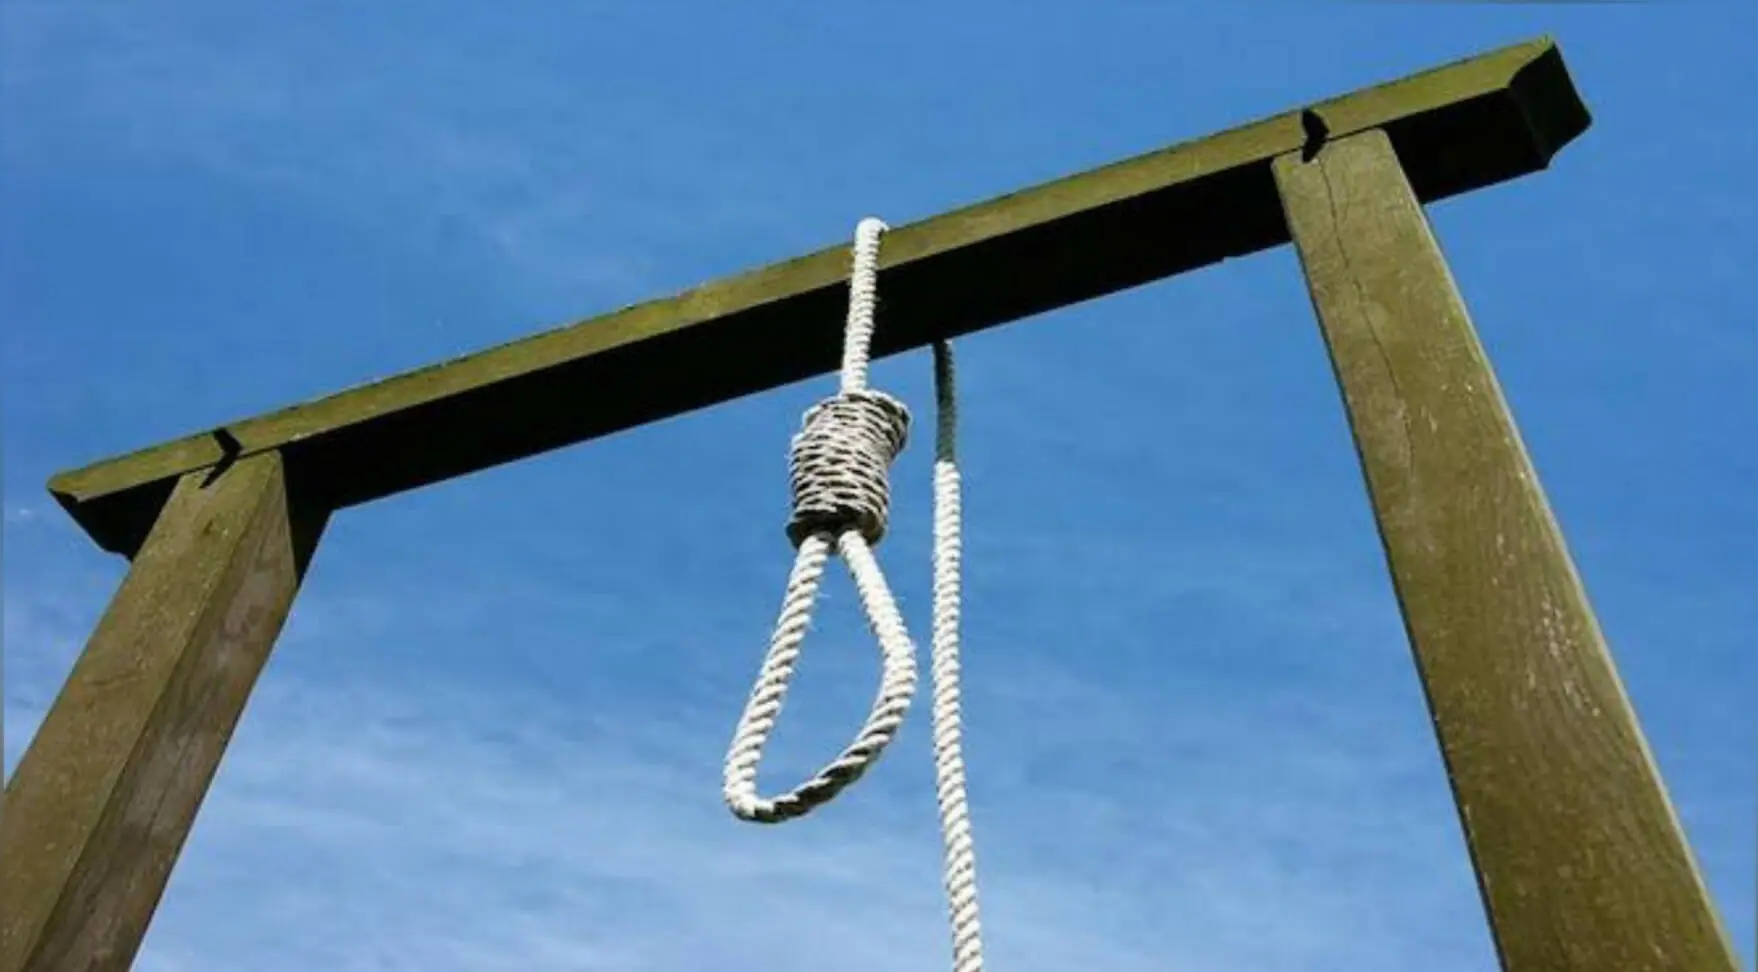 Ekiti: 20-Year-Old, Two Other Great Men To Die By Hanging For Robbery, Murder